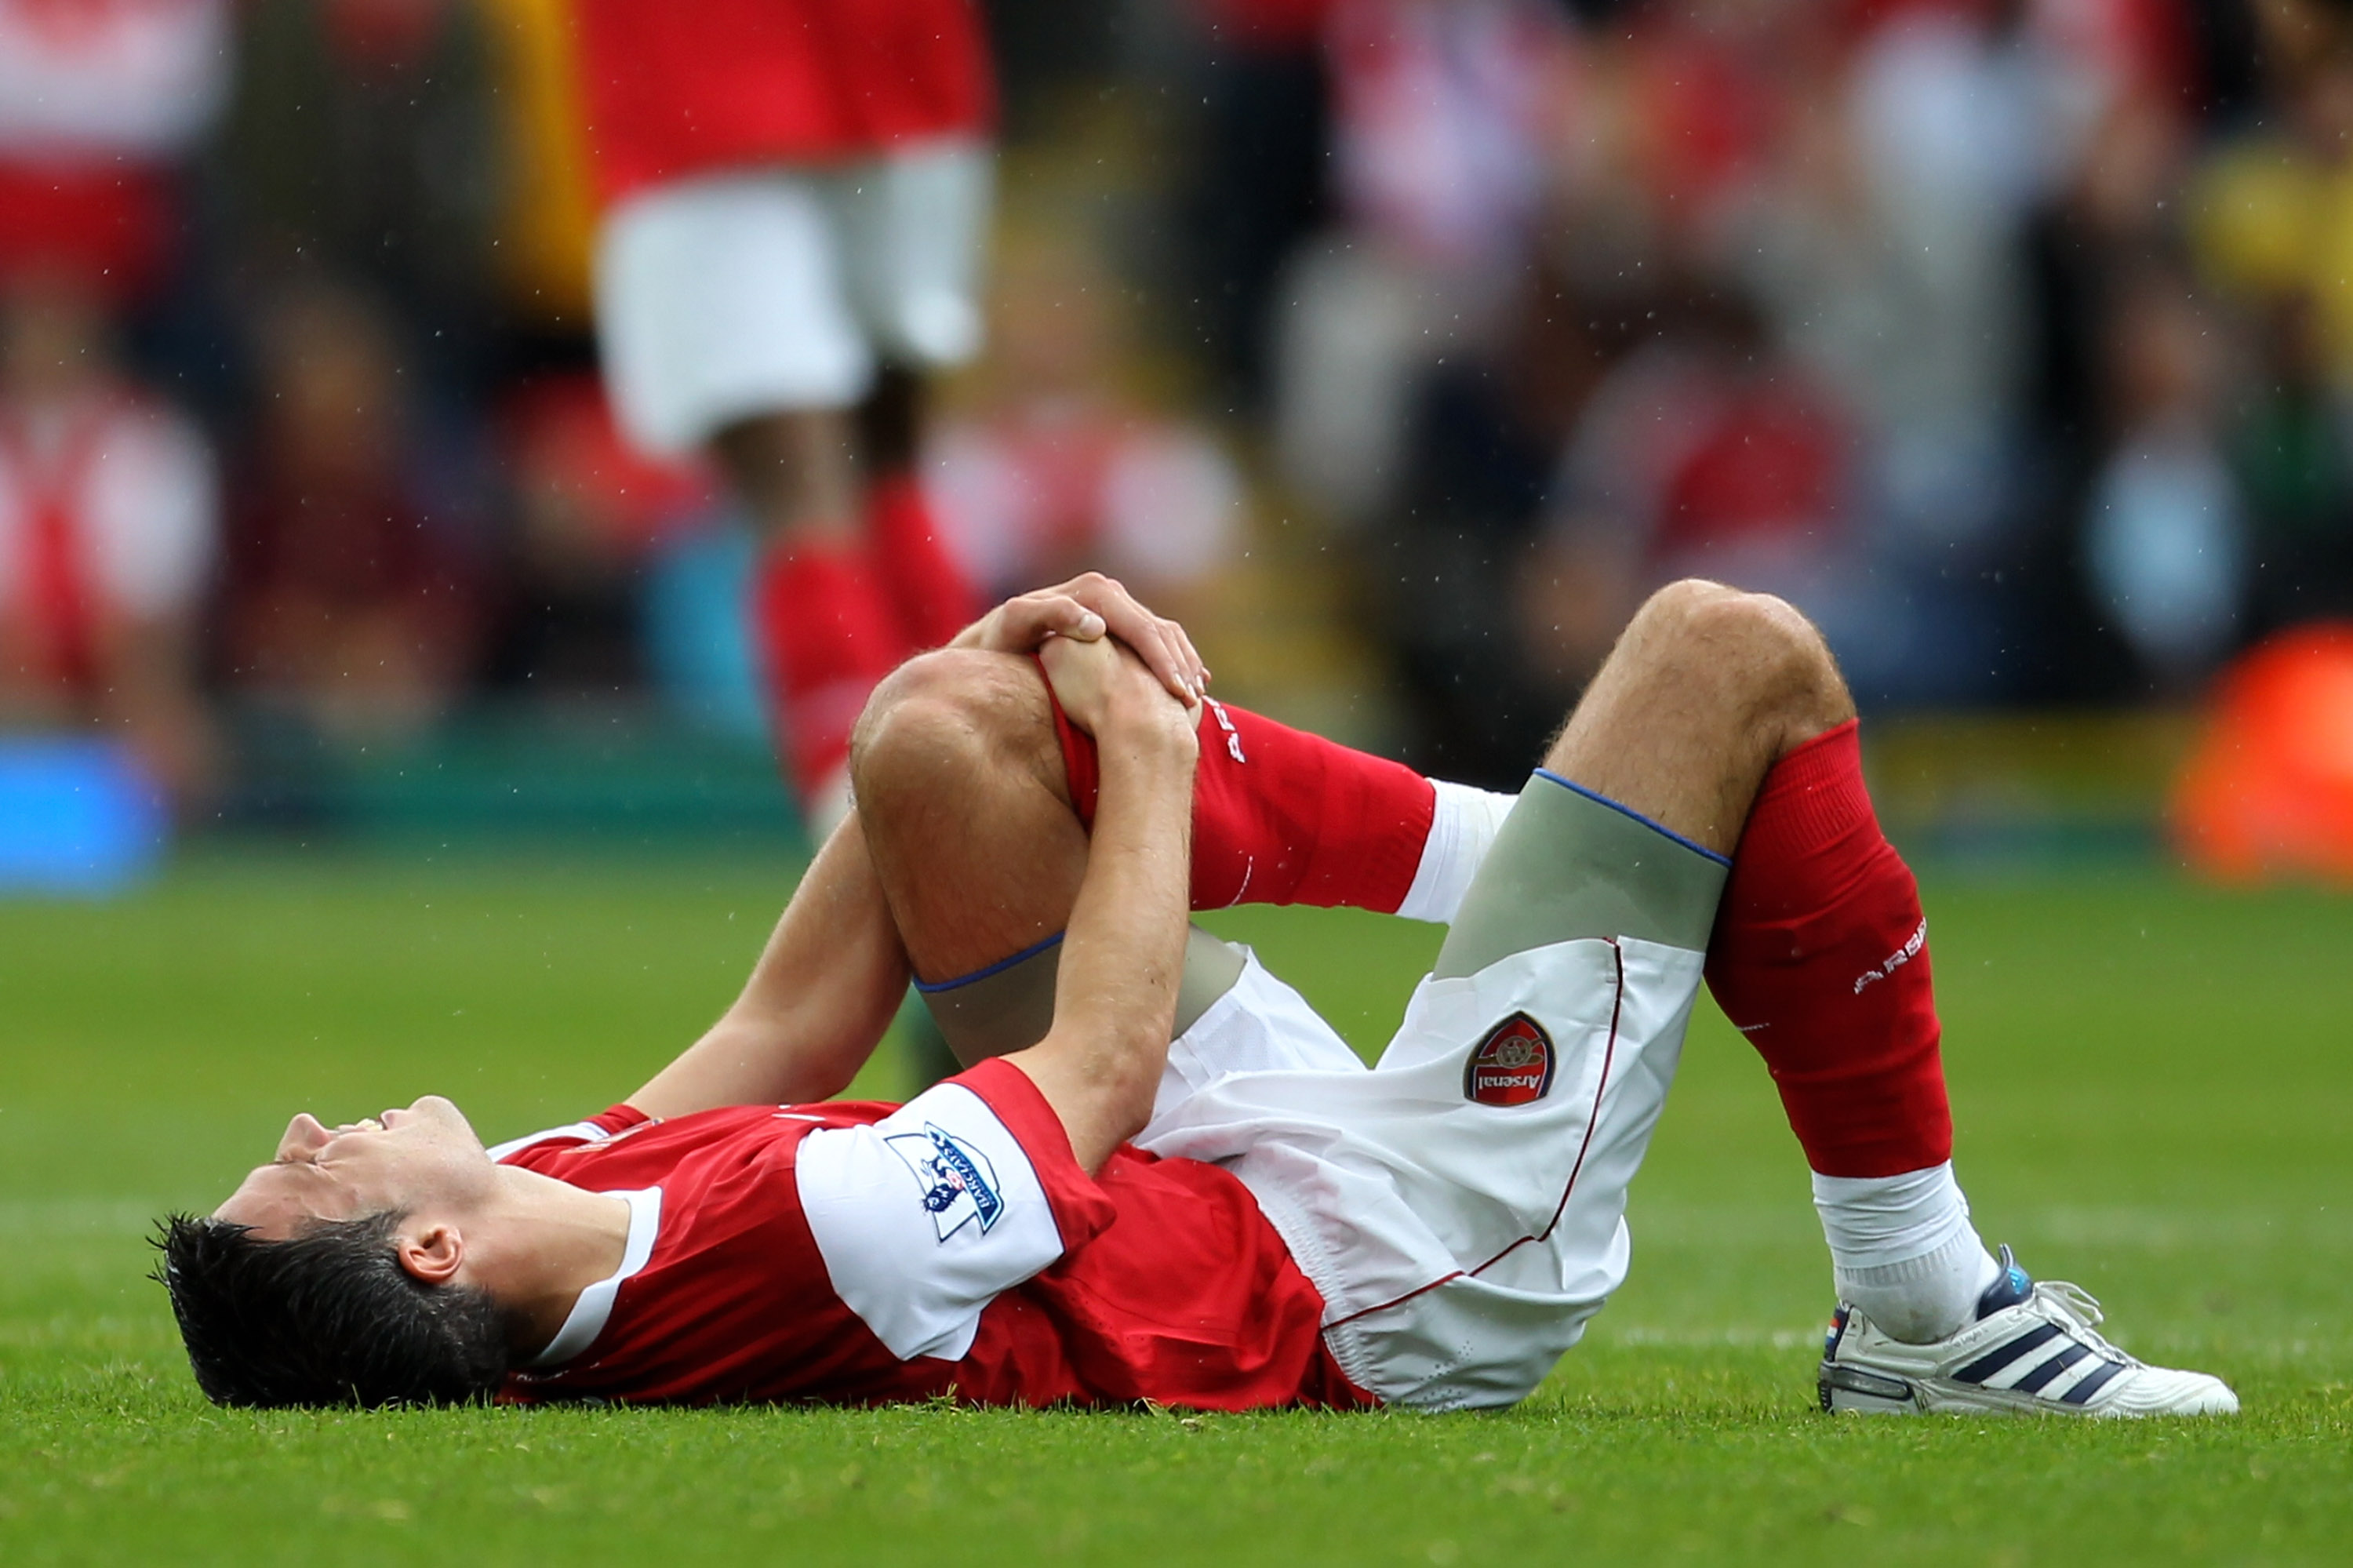 BLACKBURN, ENGLAND - AUGUST 28:  Robin van Persie of Arsenal holds his knee during the Barclays Premier League match between Blackburn Rovers and Arsenal at Ewood Park on August 28, 2010 in Blackburn, England.  (Photo by Alex Livesey/Getty Images)